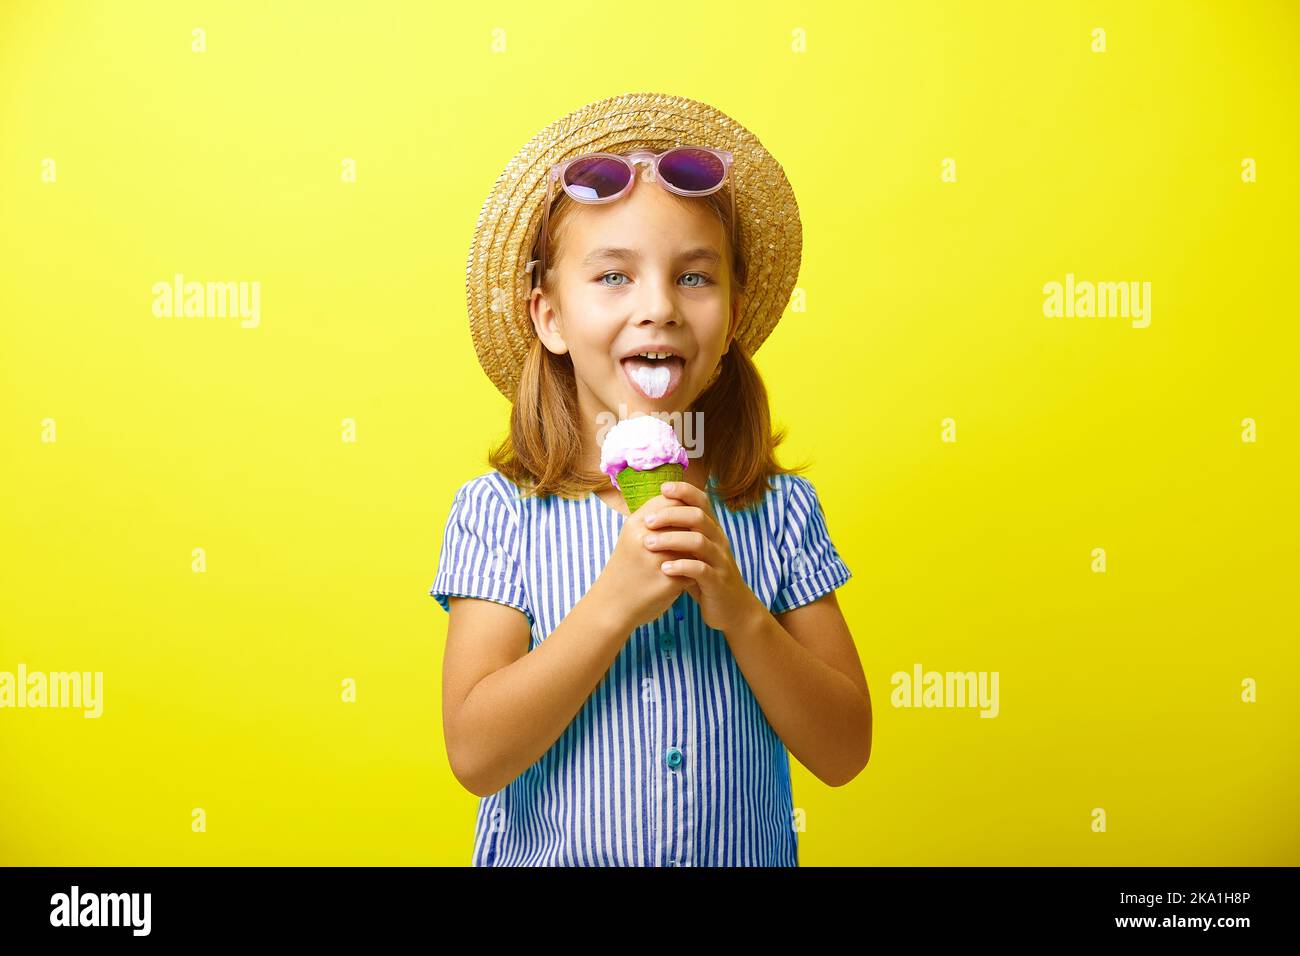 Cheerful little girl with ice cream on yellow isolated background. Stock Photo